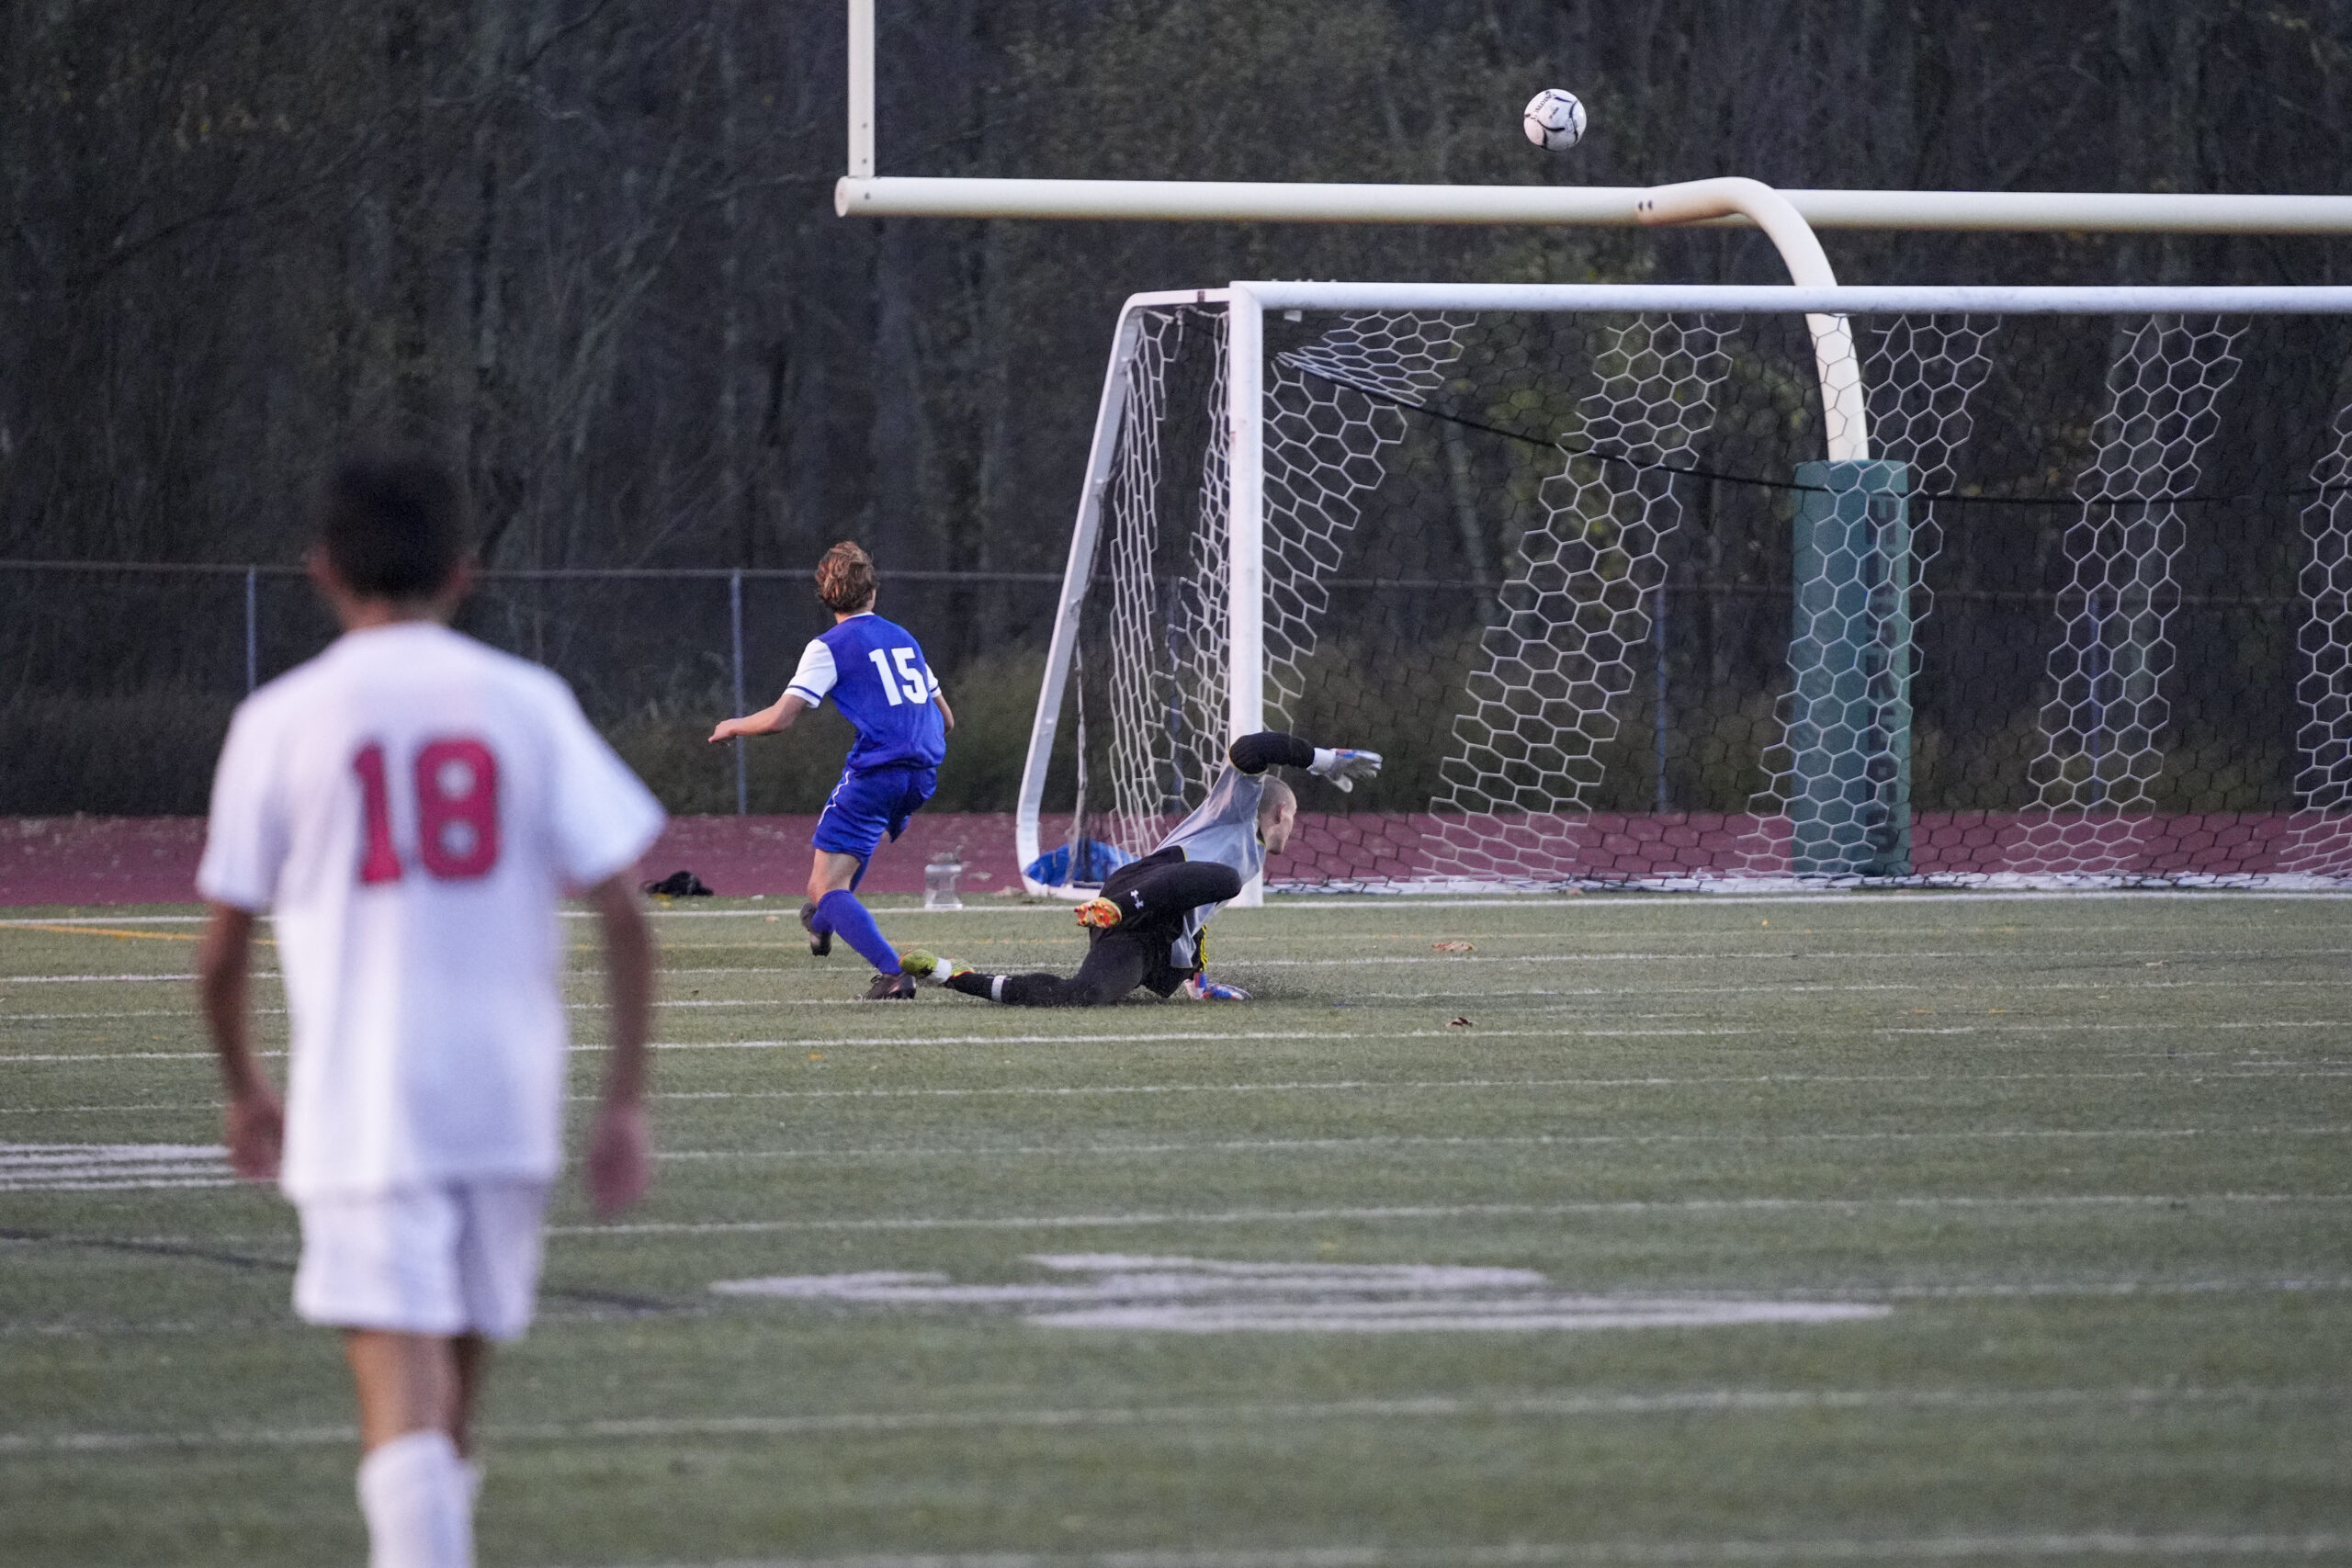 Haldane junior Max Westphal gets the ball over Pierson senior goalie Gavin Gilbride for the first goal of the game in the second half.    RON ESPOSITO